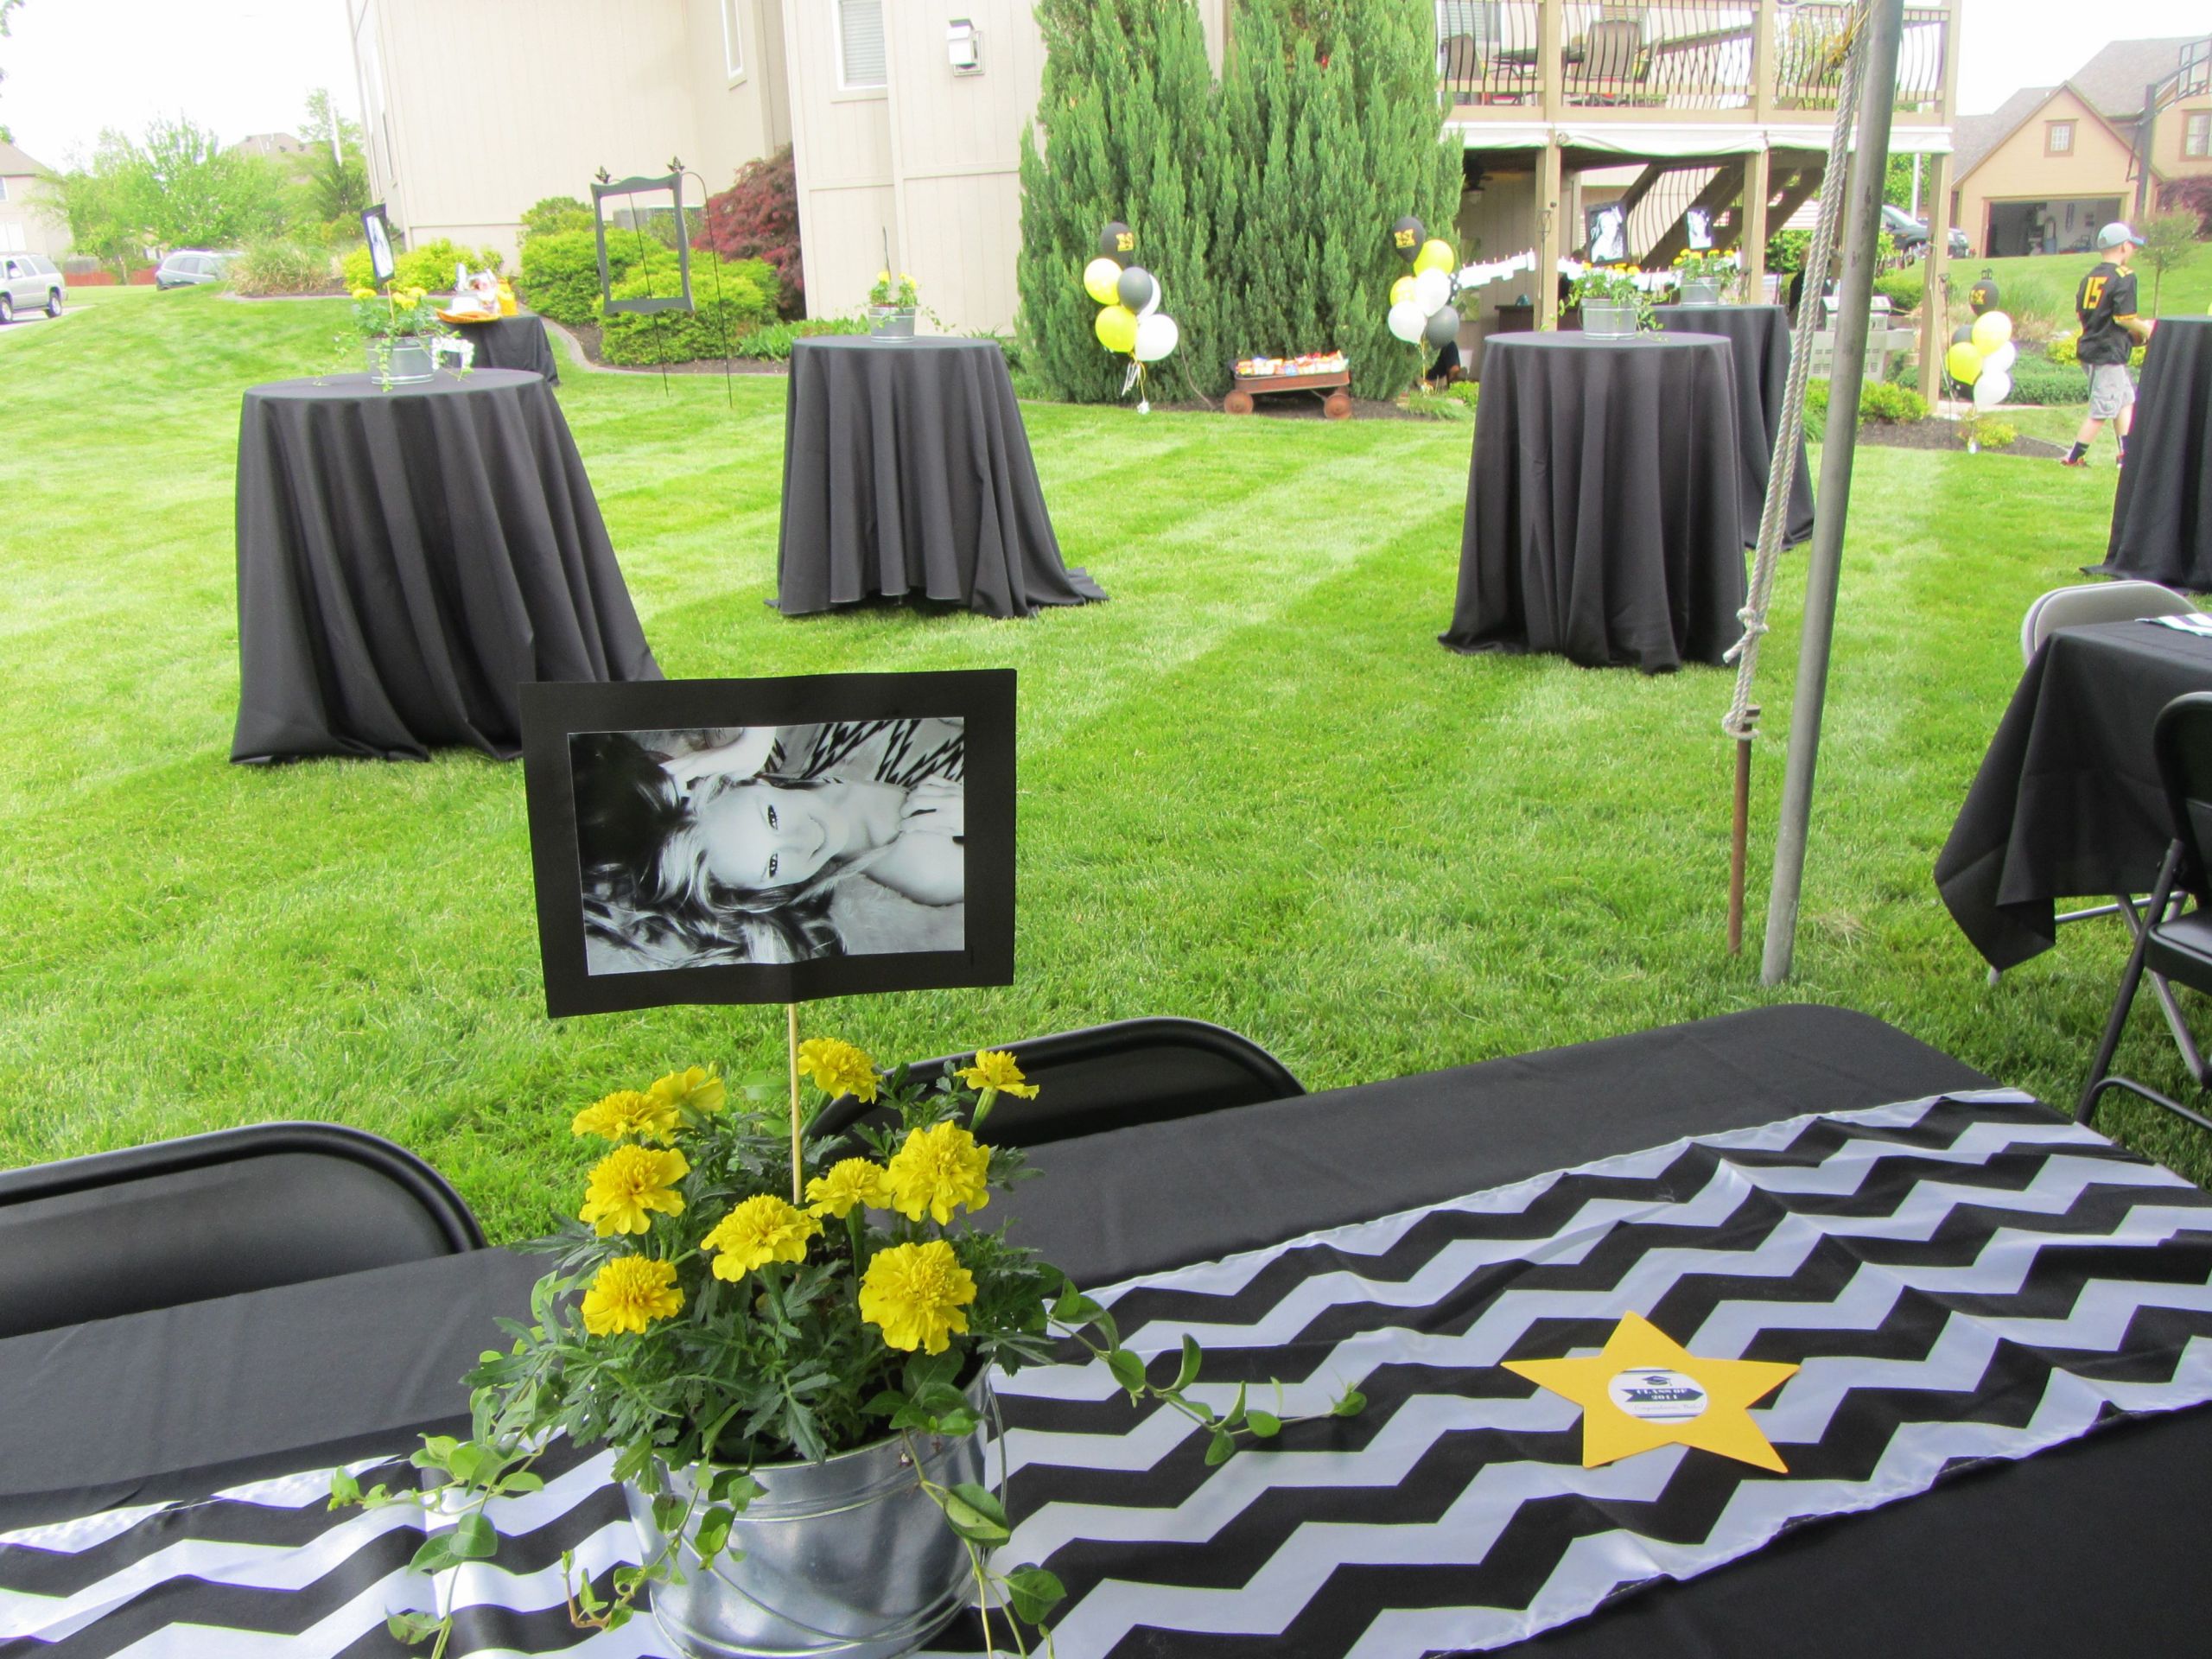 Chic Simple Backyard Graduation Party Decorating Ideas
 Outdoor Graduation Party Black White Yellow